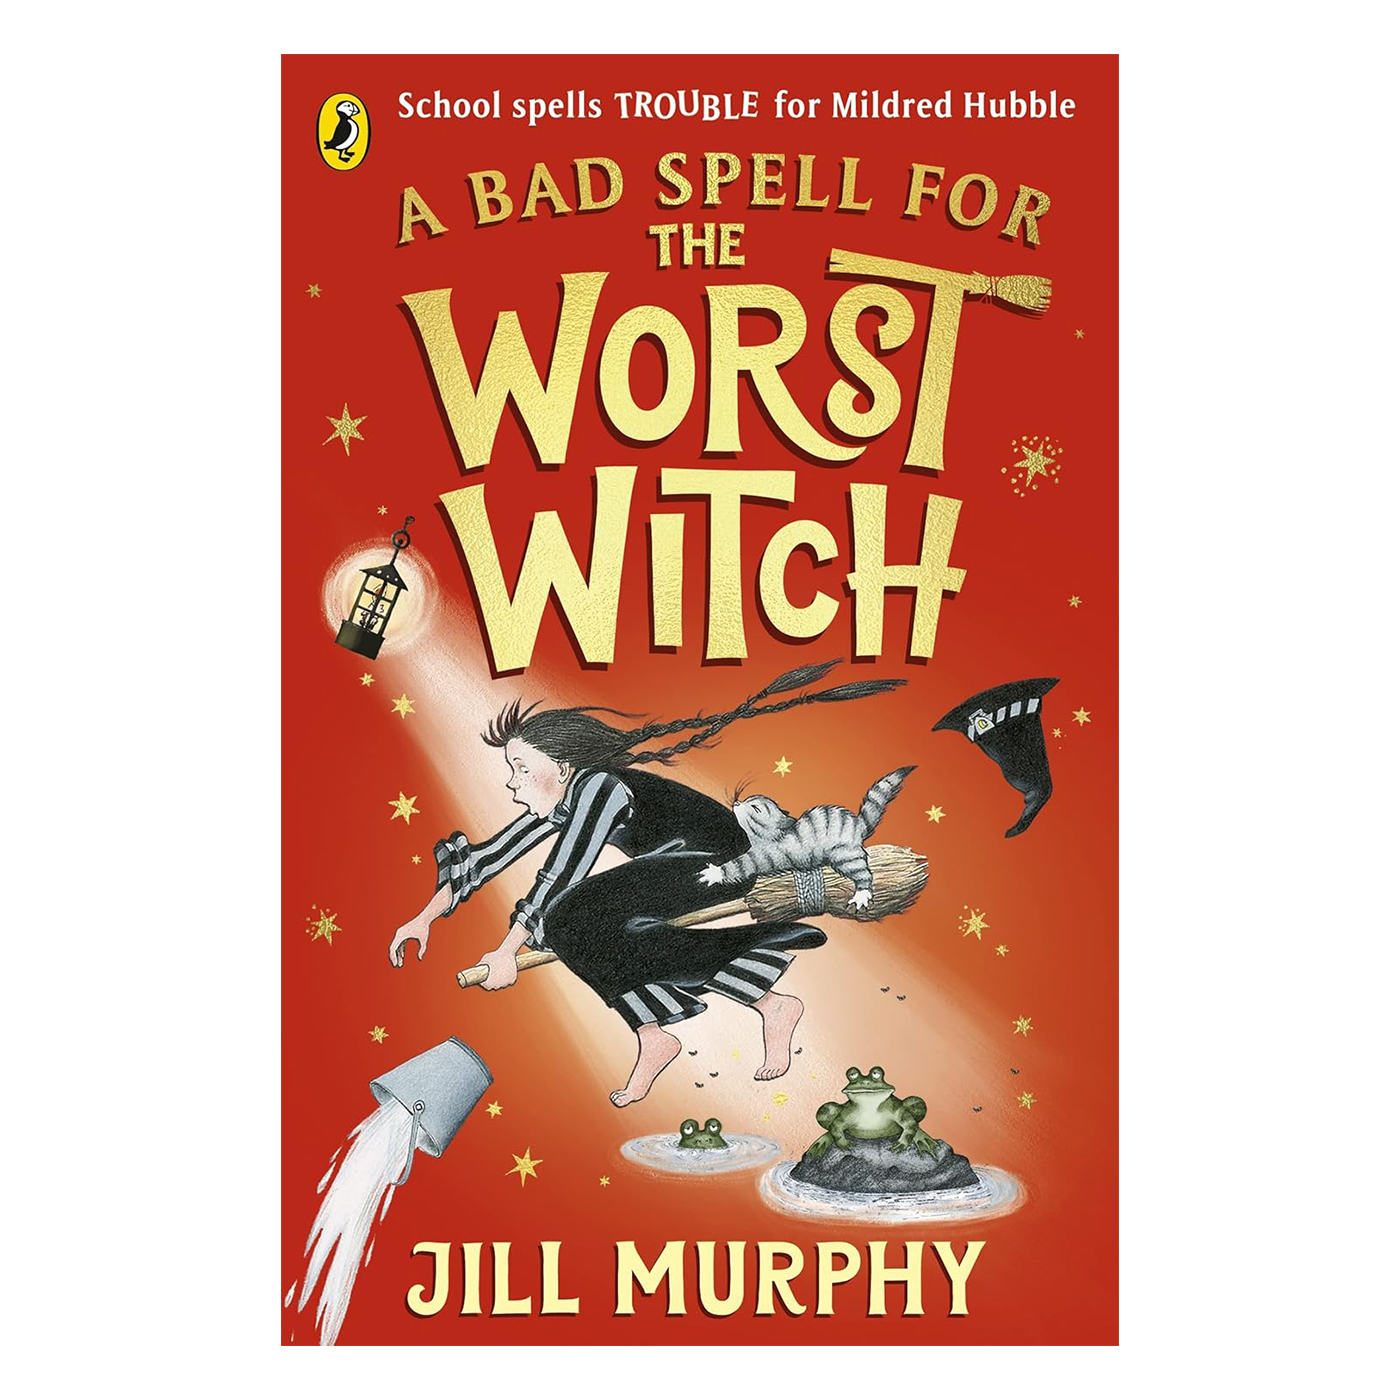  A Bad Spell For The Worst Witch